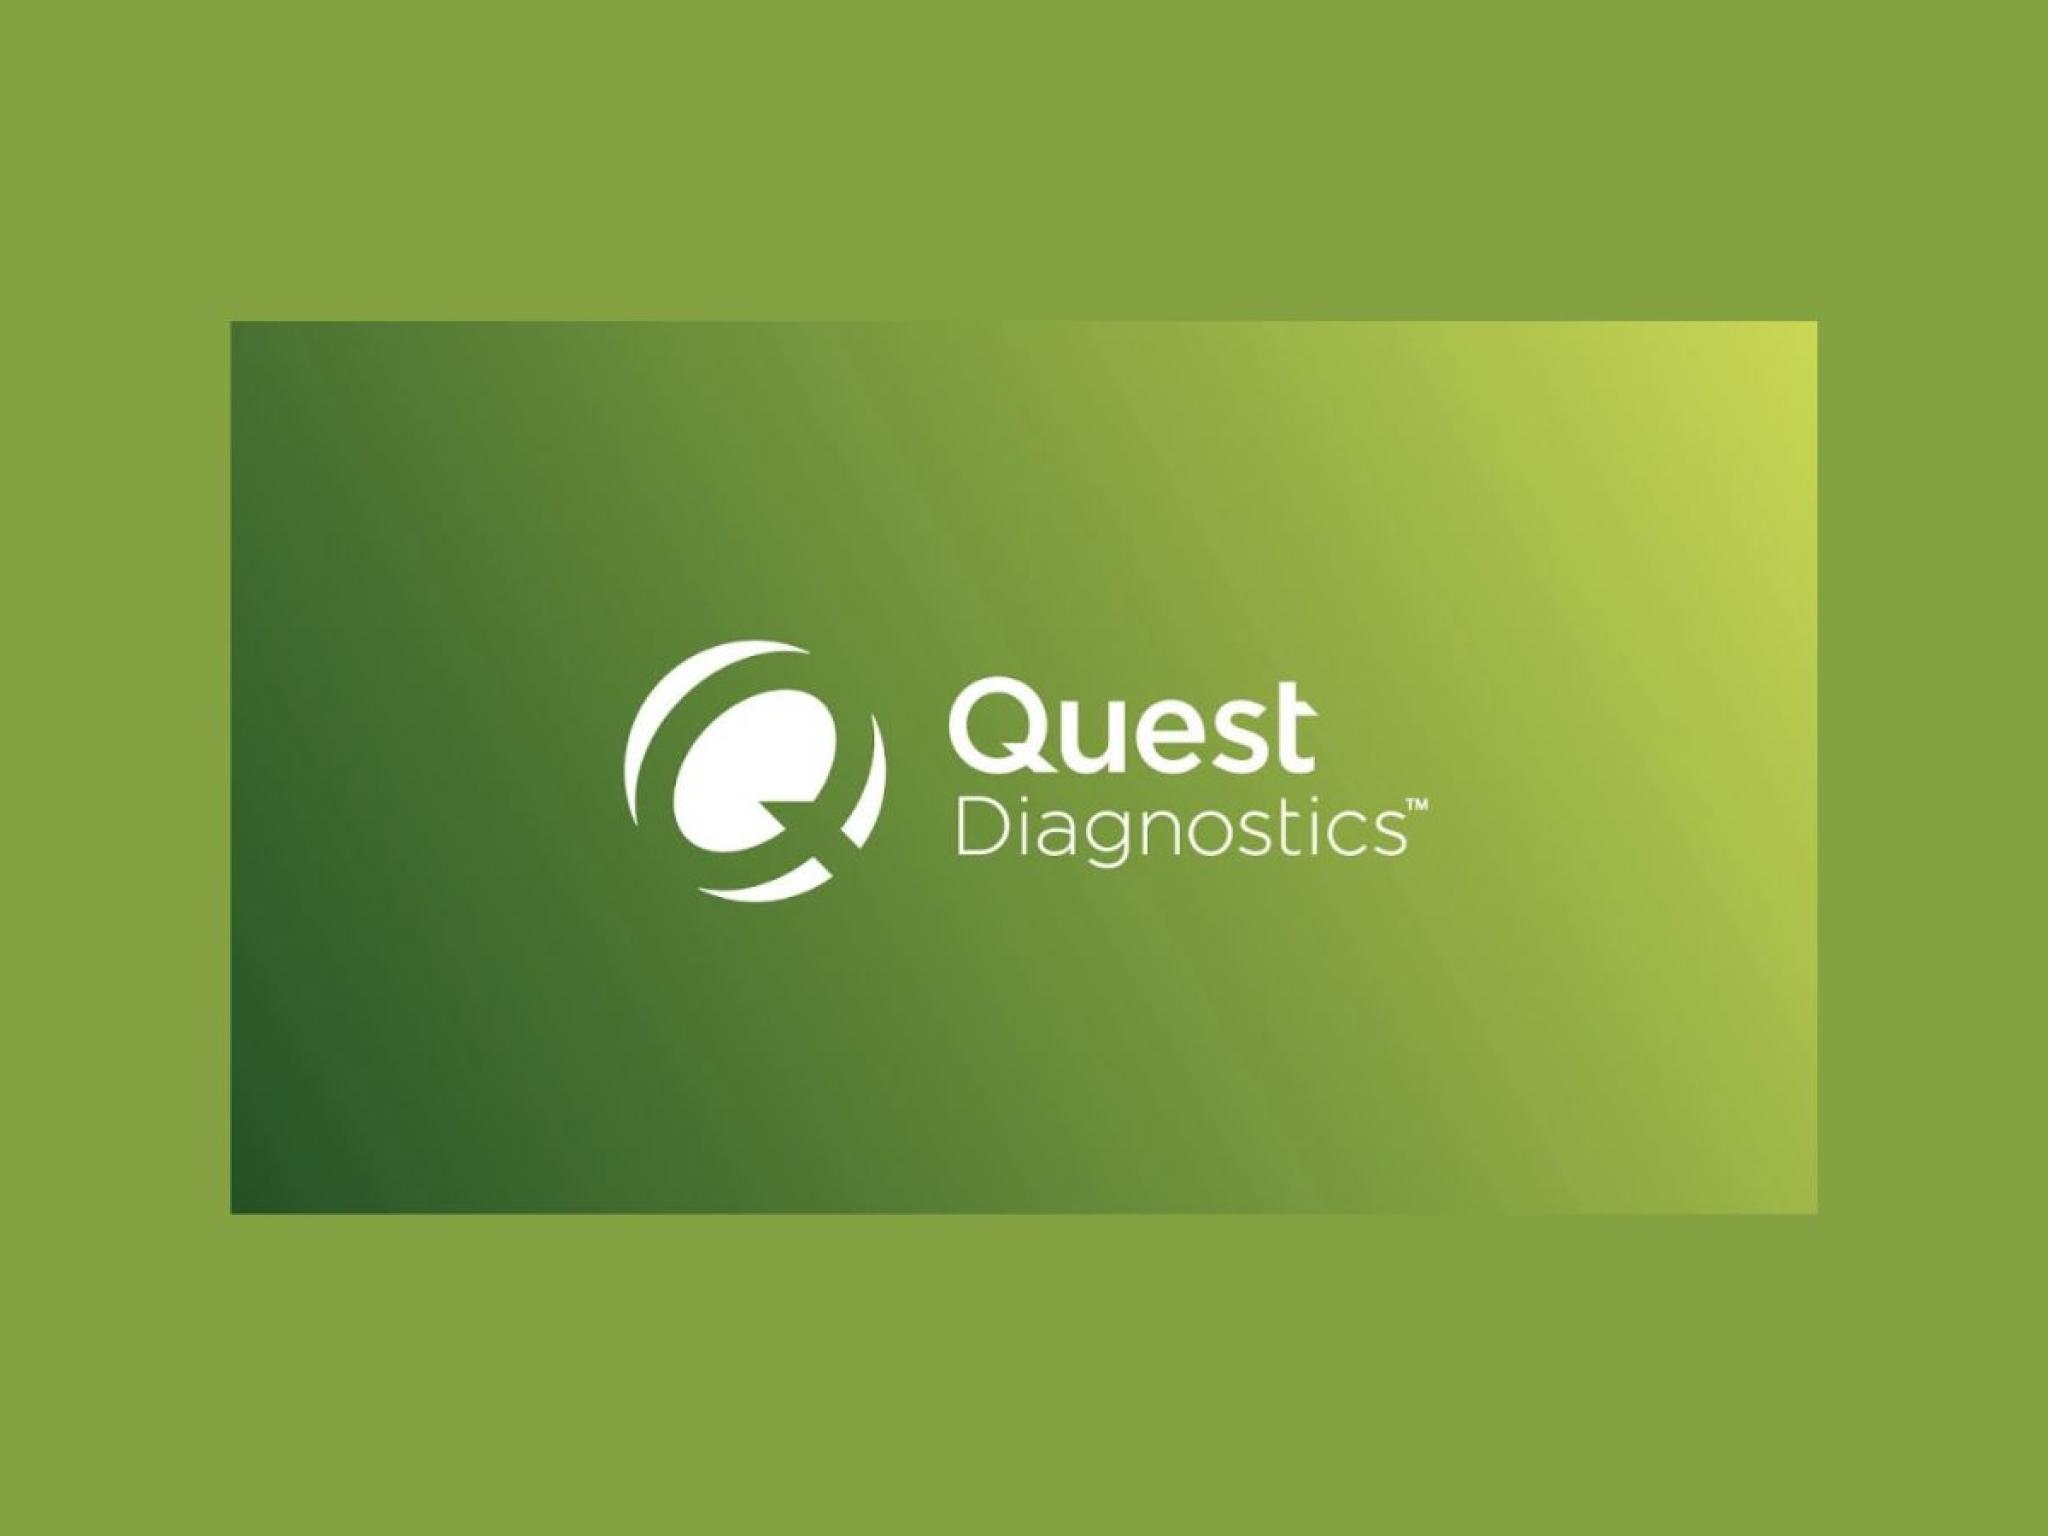  quest-diagnostics-likely-to-report-higher-q4-earnings-here-are-the-recent-forecast-changes-from-wall-streets-most-accurate-analysts 